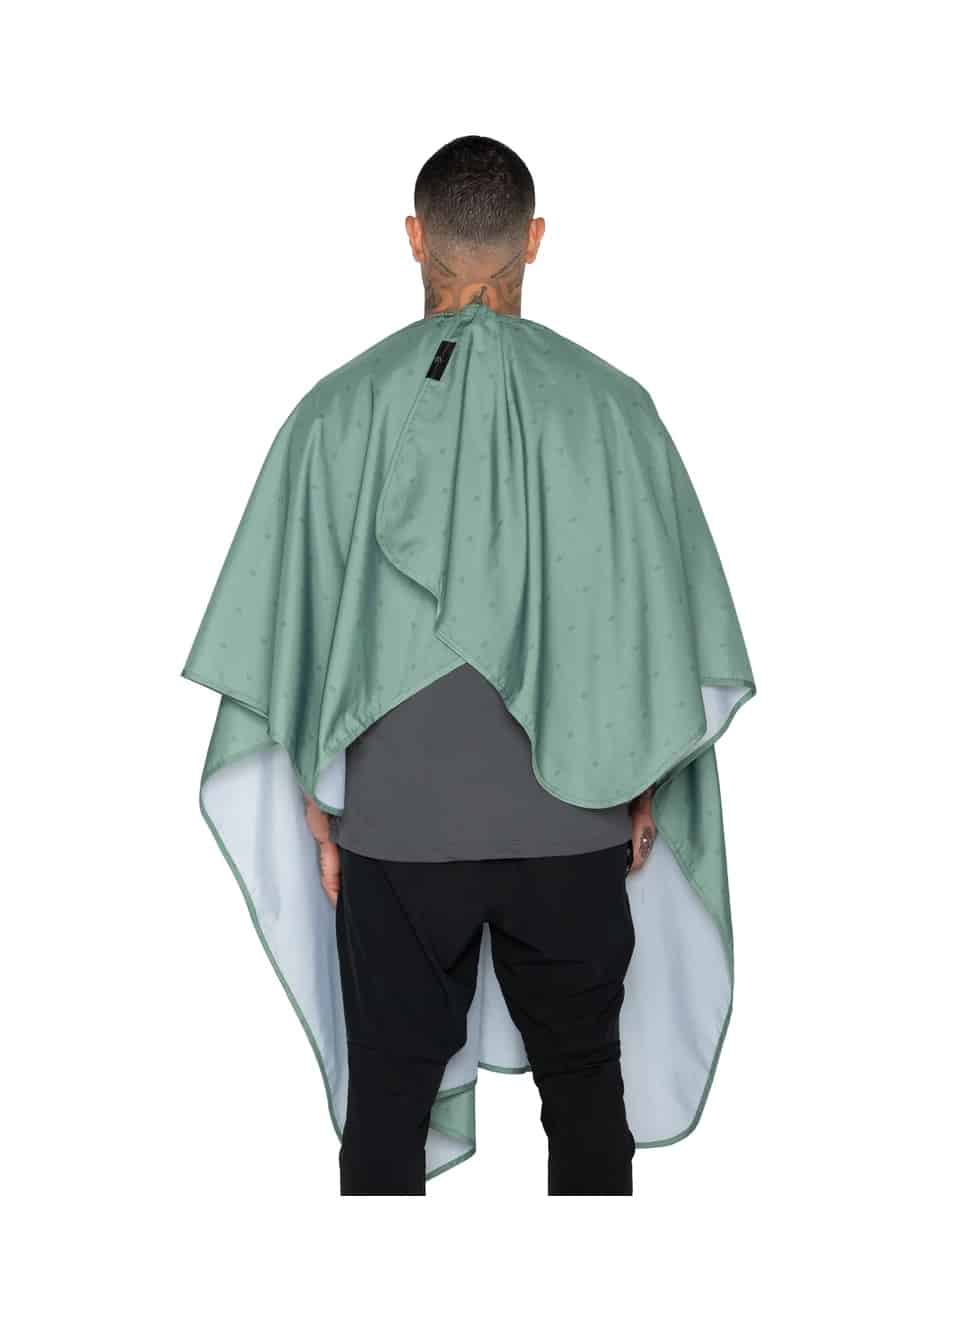  Barber Strong The Barber Cape Haircut Cover for Men